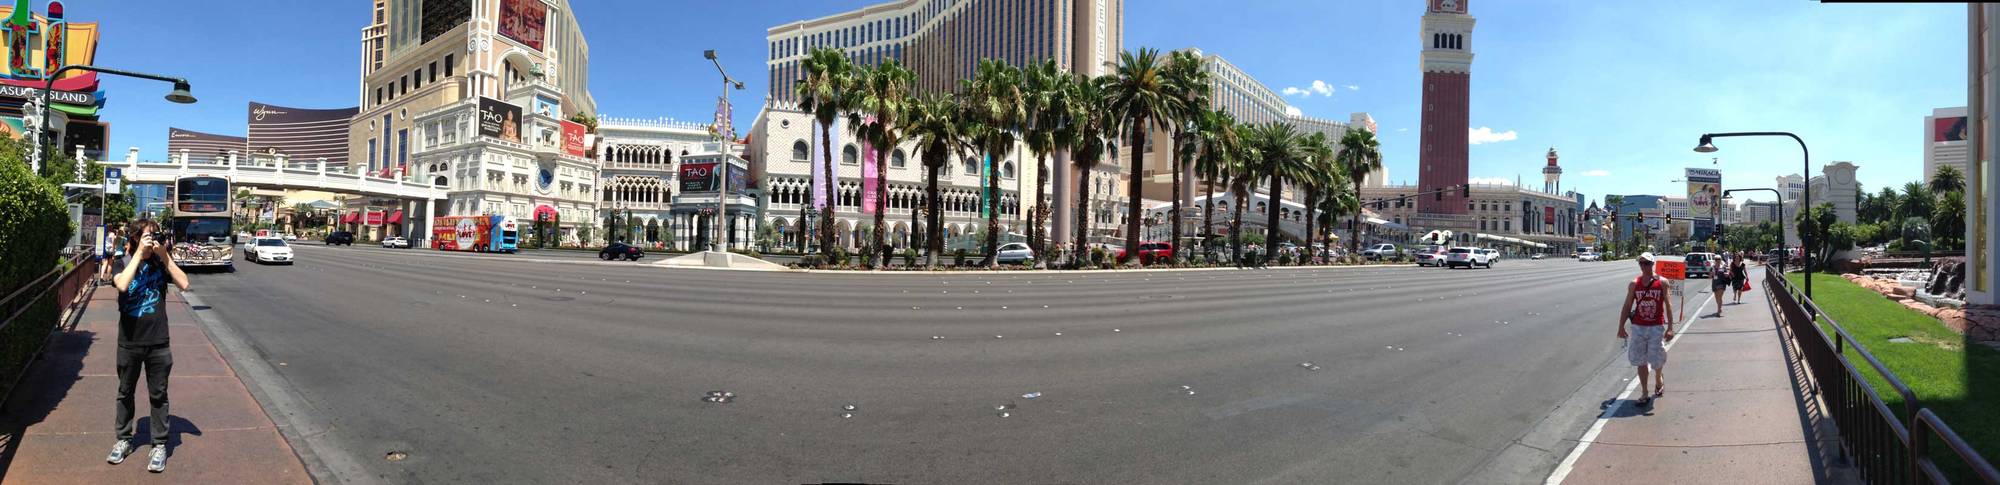 Panorama of the Las Vegas strip, with Richard taking a photo